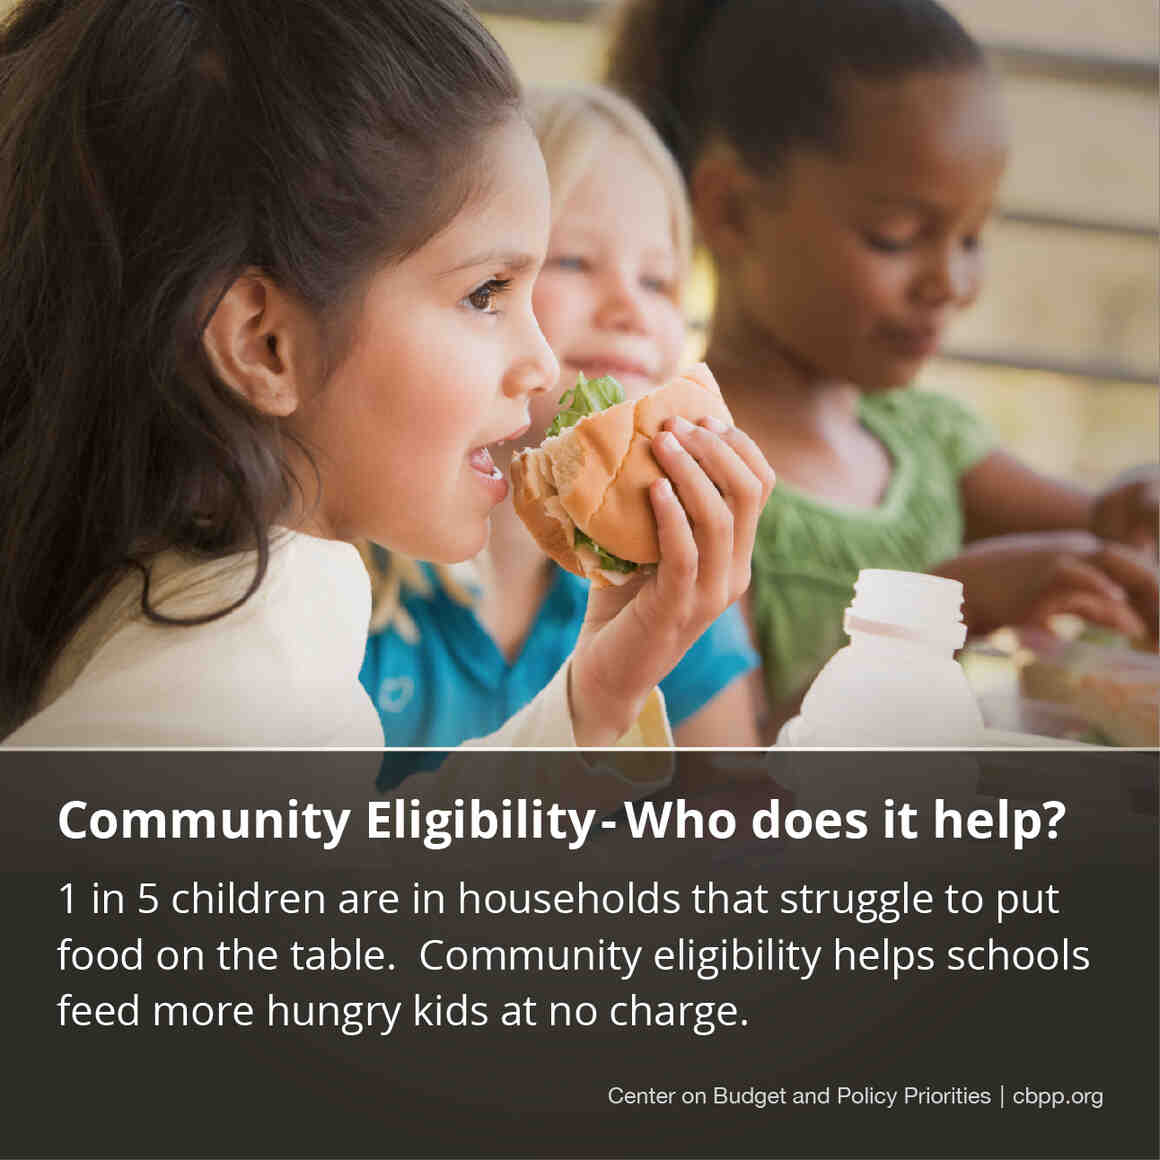 Photographic: Community Eligibility - Who does it help?